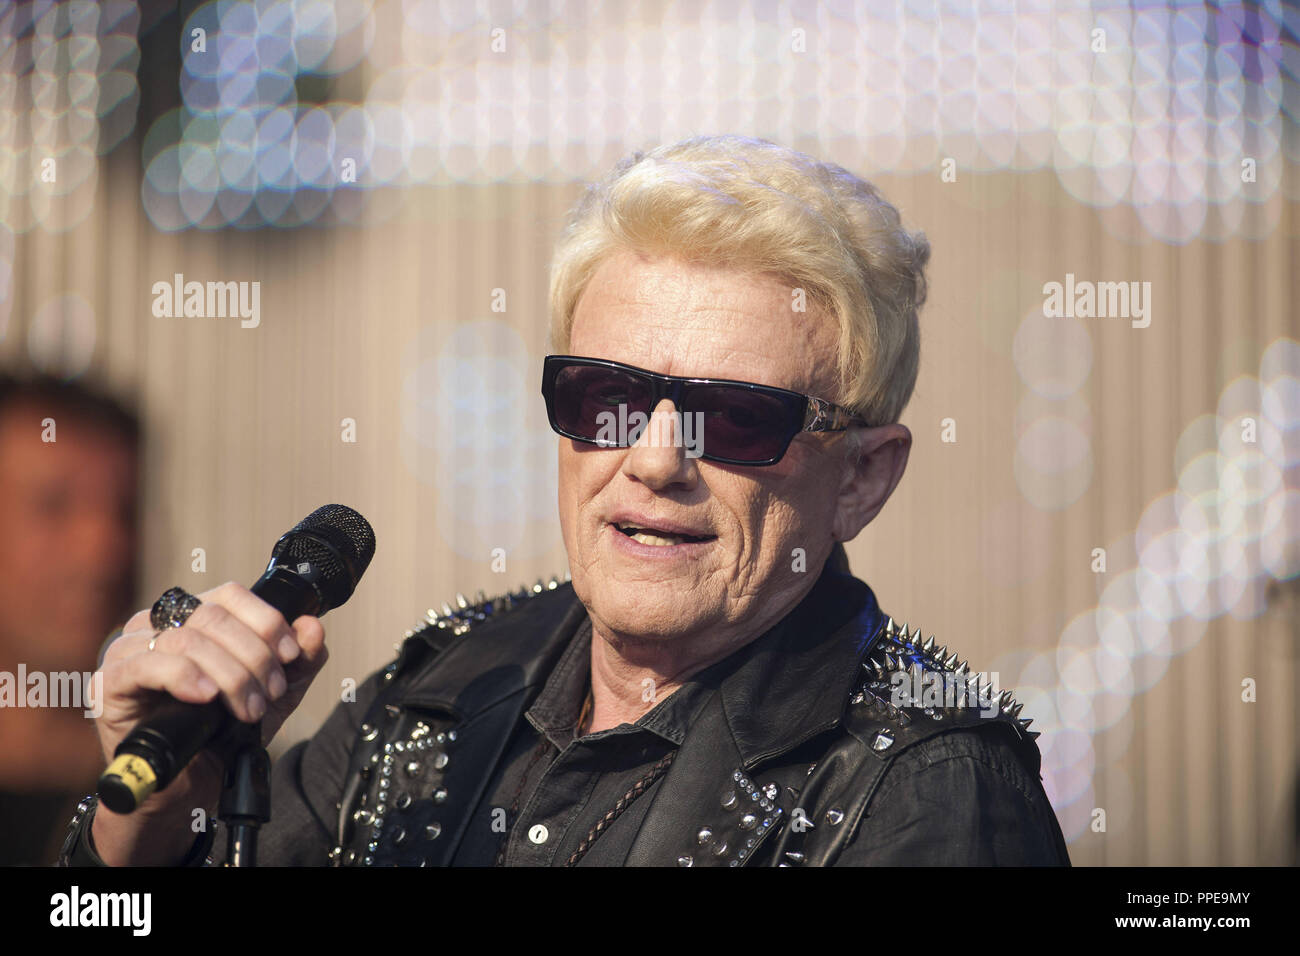 Concert of the singer Heino in the Olympic Stadium at the Munich Summer Night's Dream 2013. Stock Photo